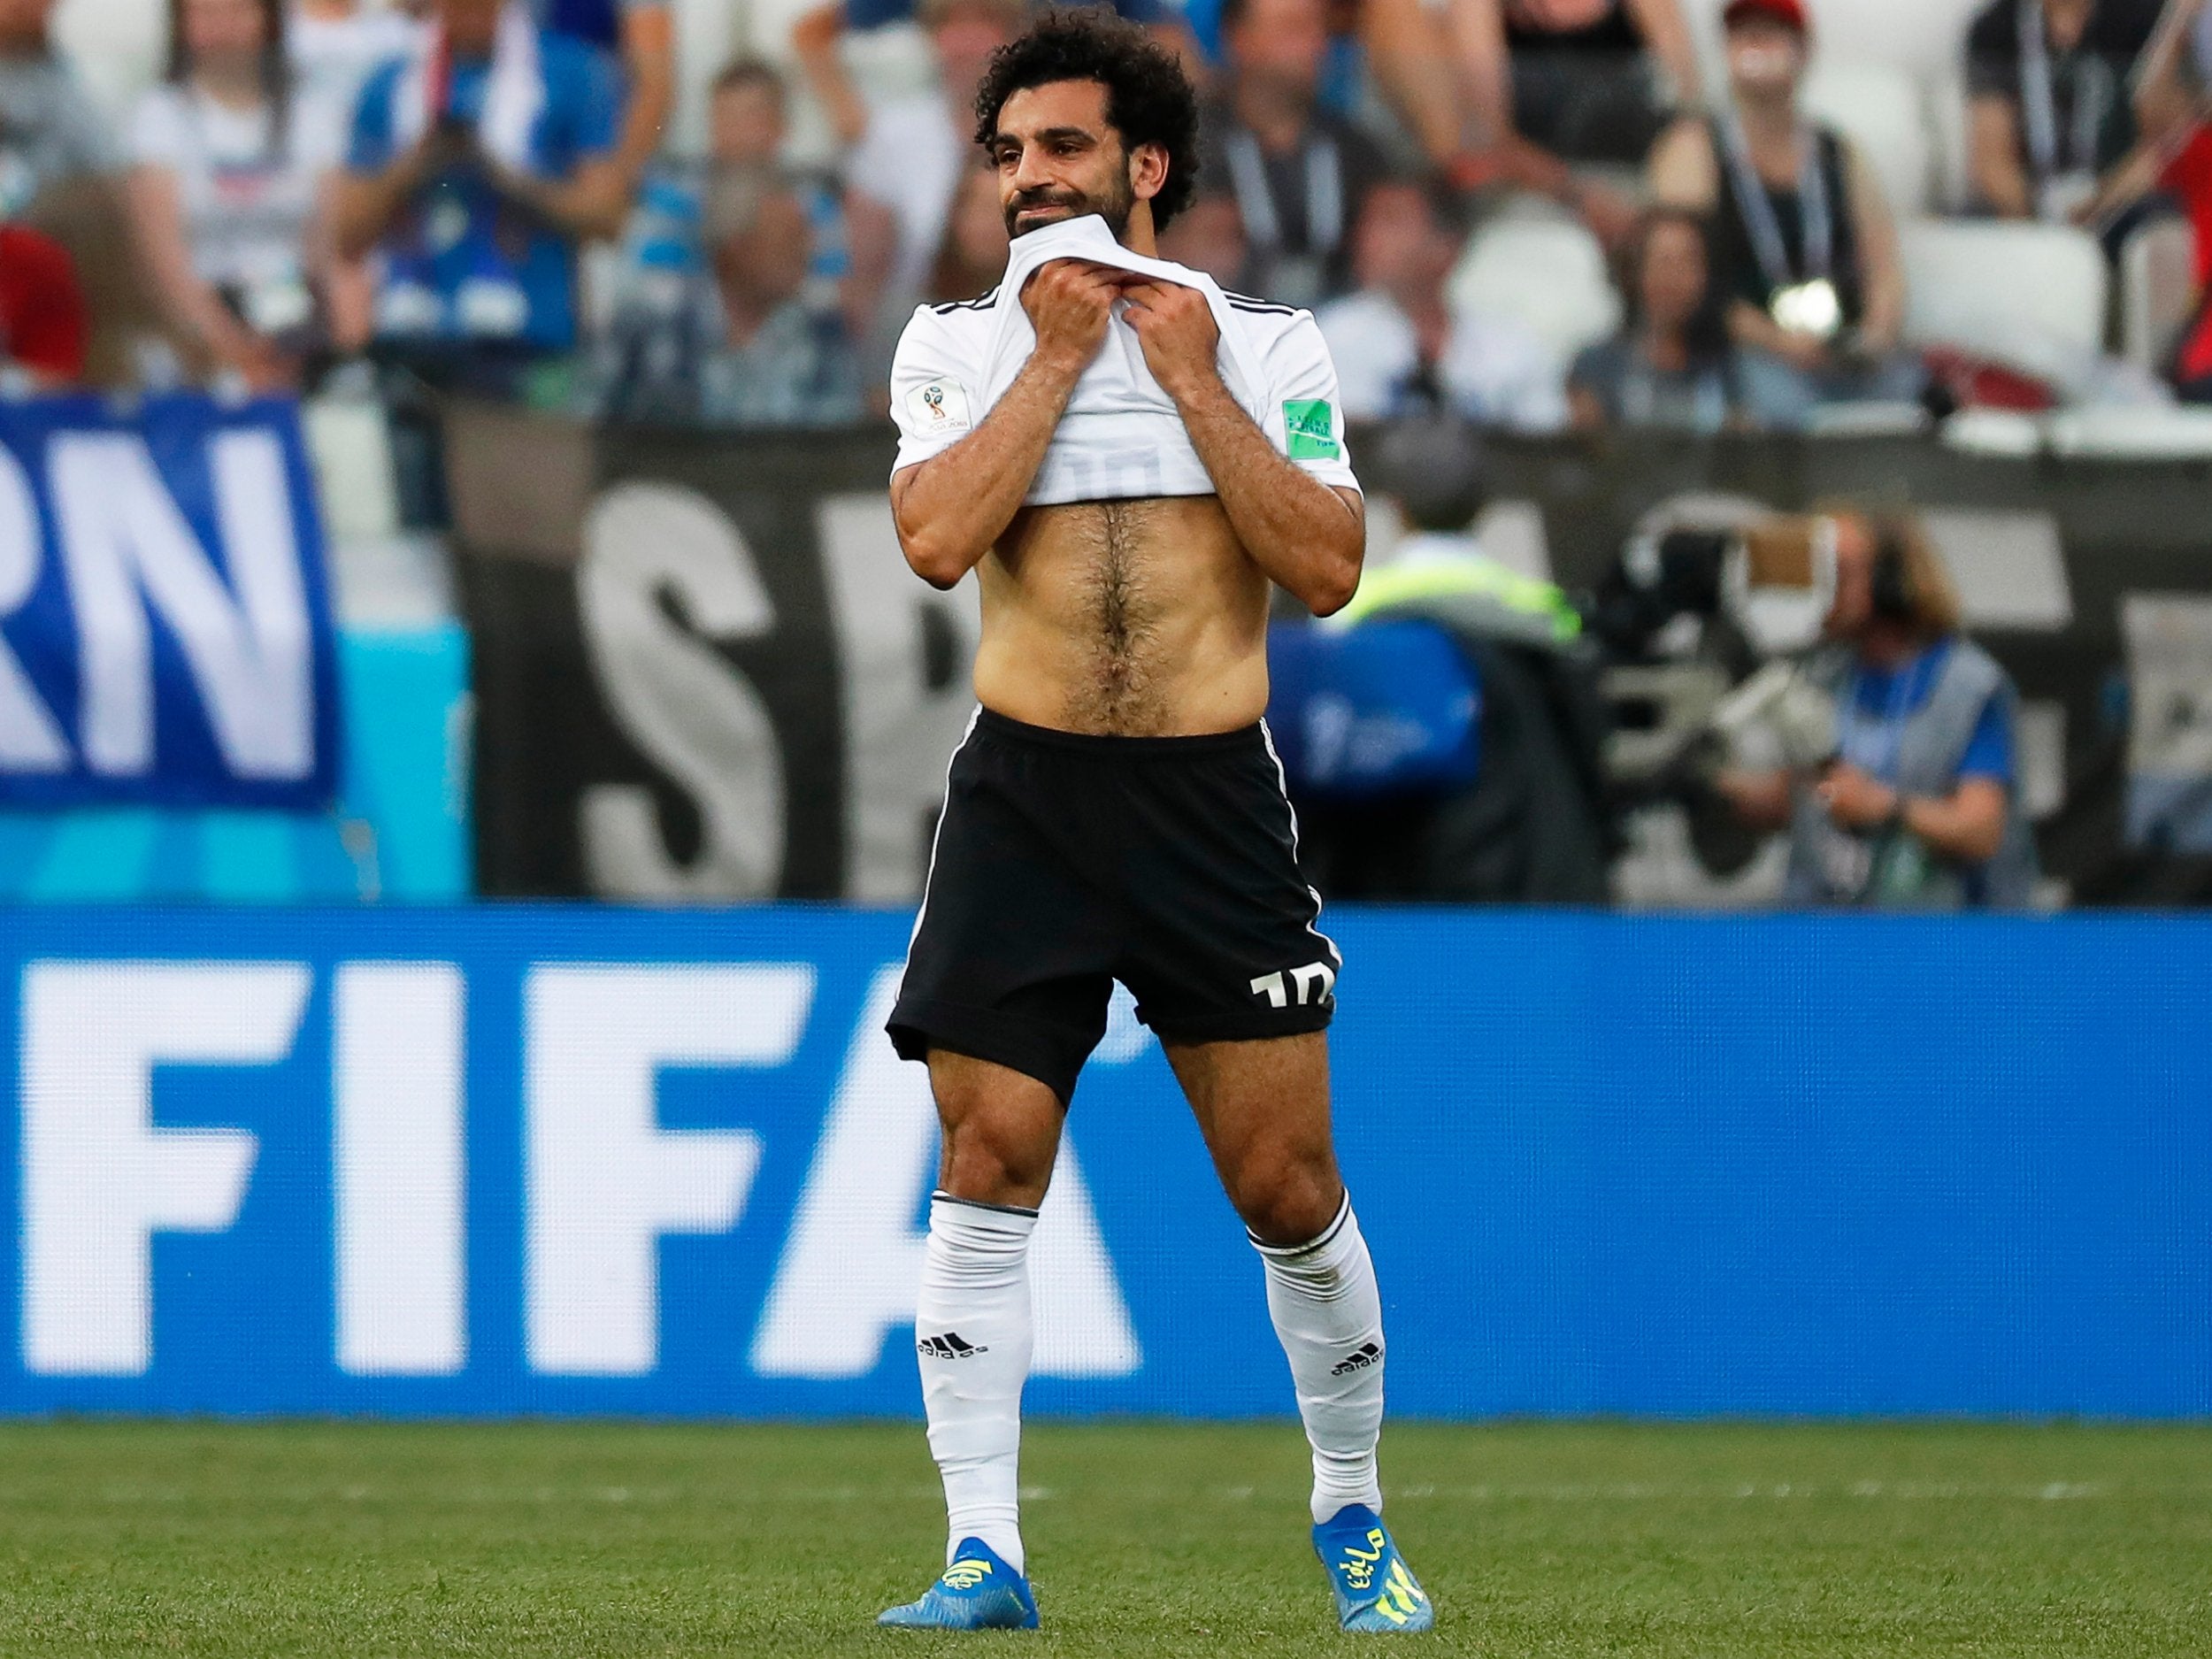 Salah looked like a player who was carrying much more than just Egypt's World Cup hopes